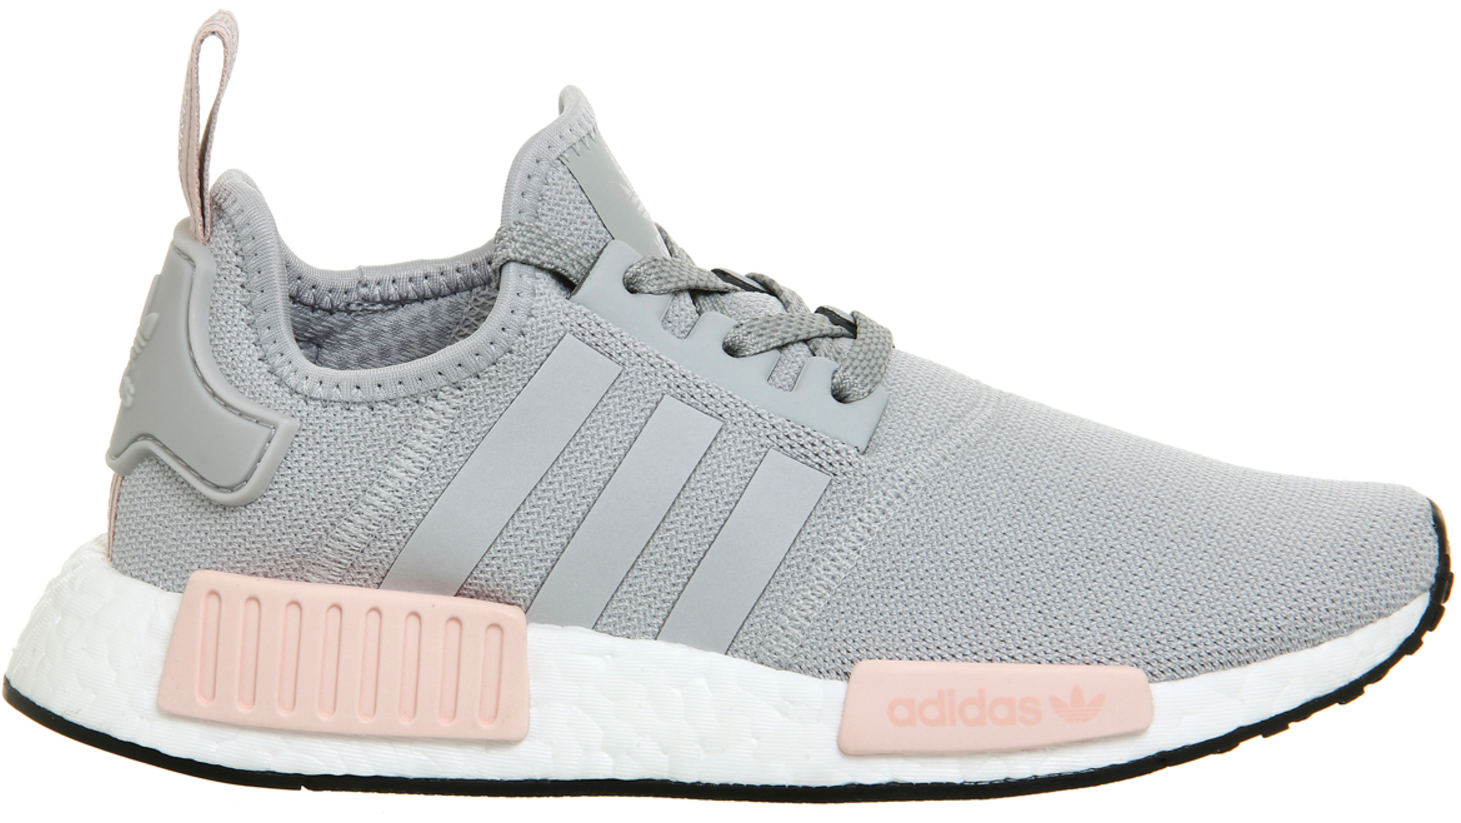 nmd r1 vapour pink